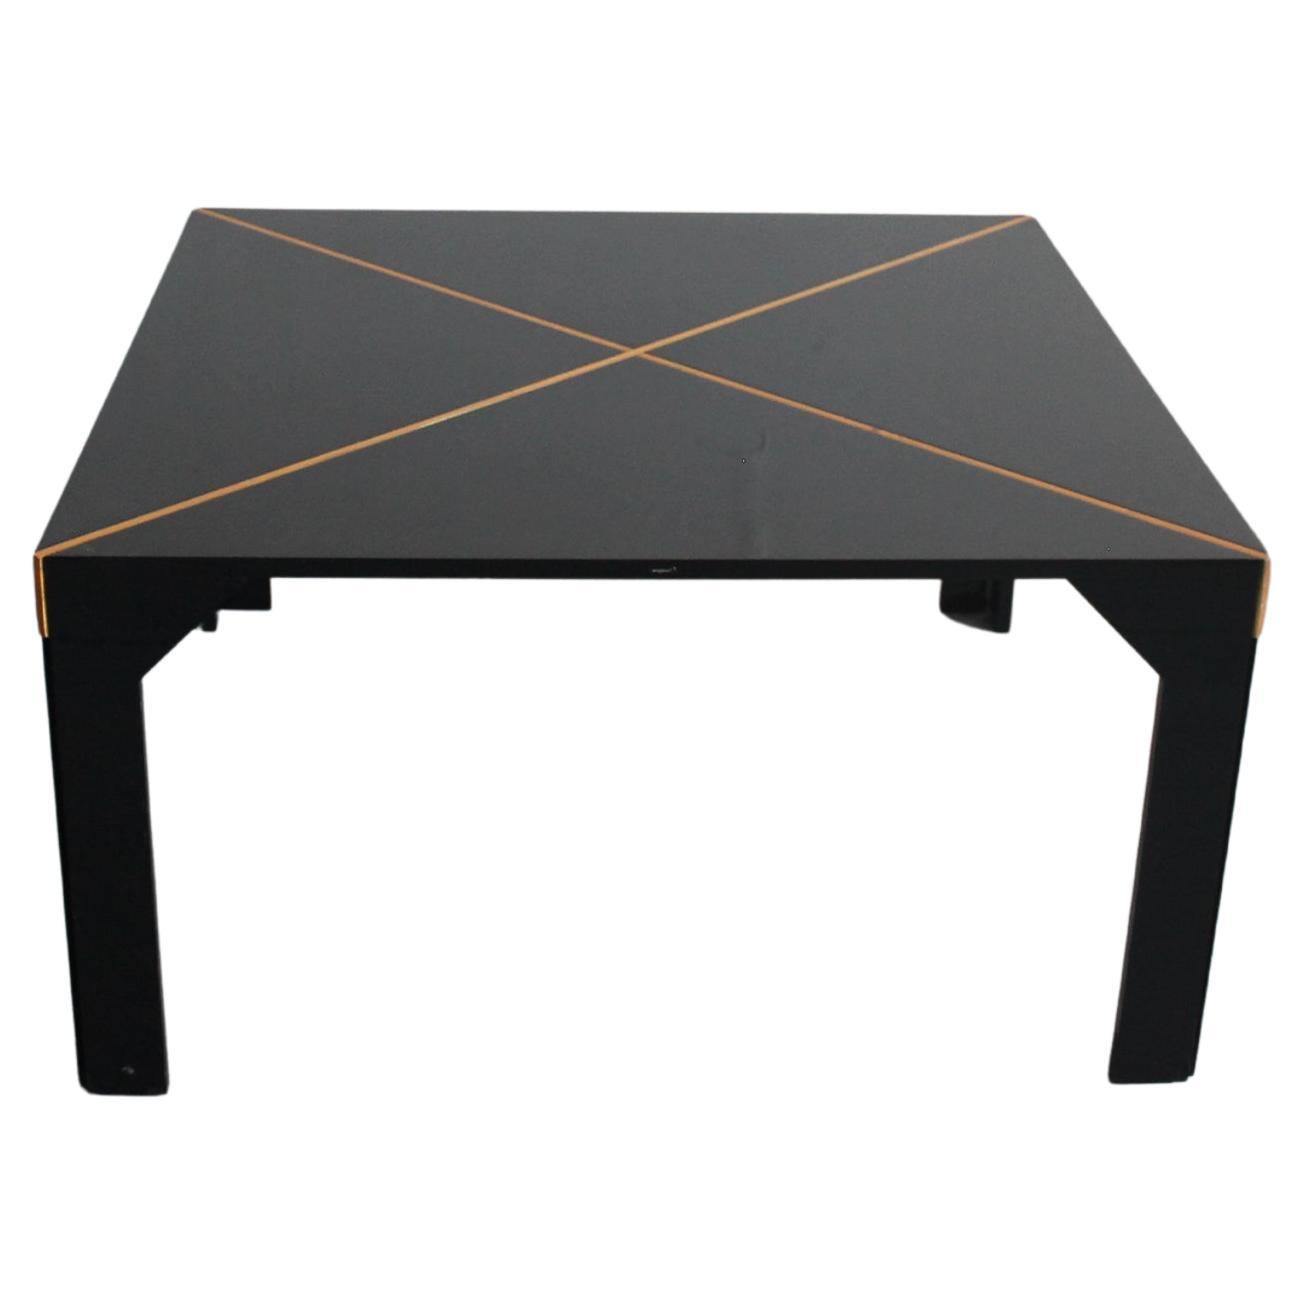 Vico Magistretti Tema Square Table in Black Lacquered Wood by B&B 1970s For Sale